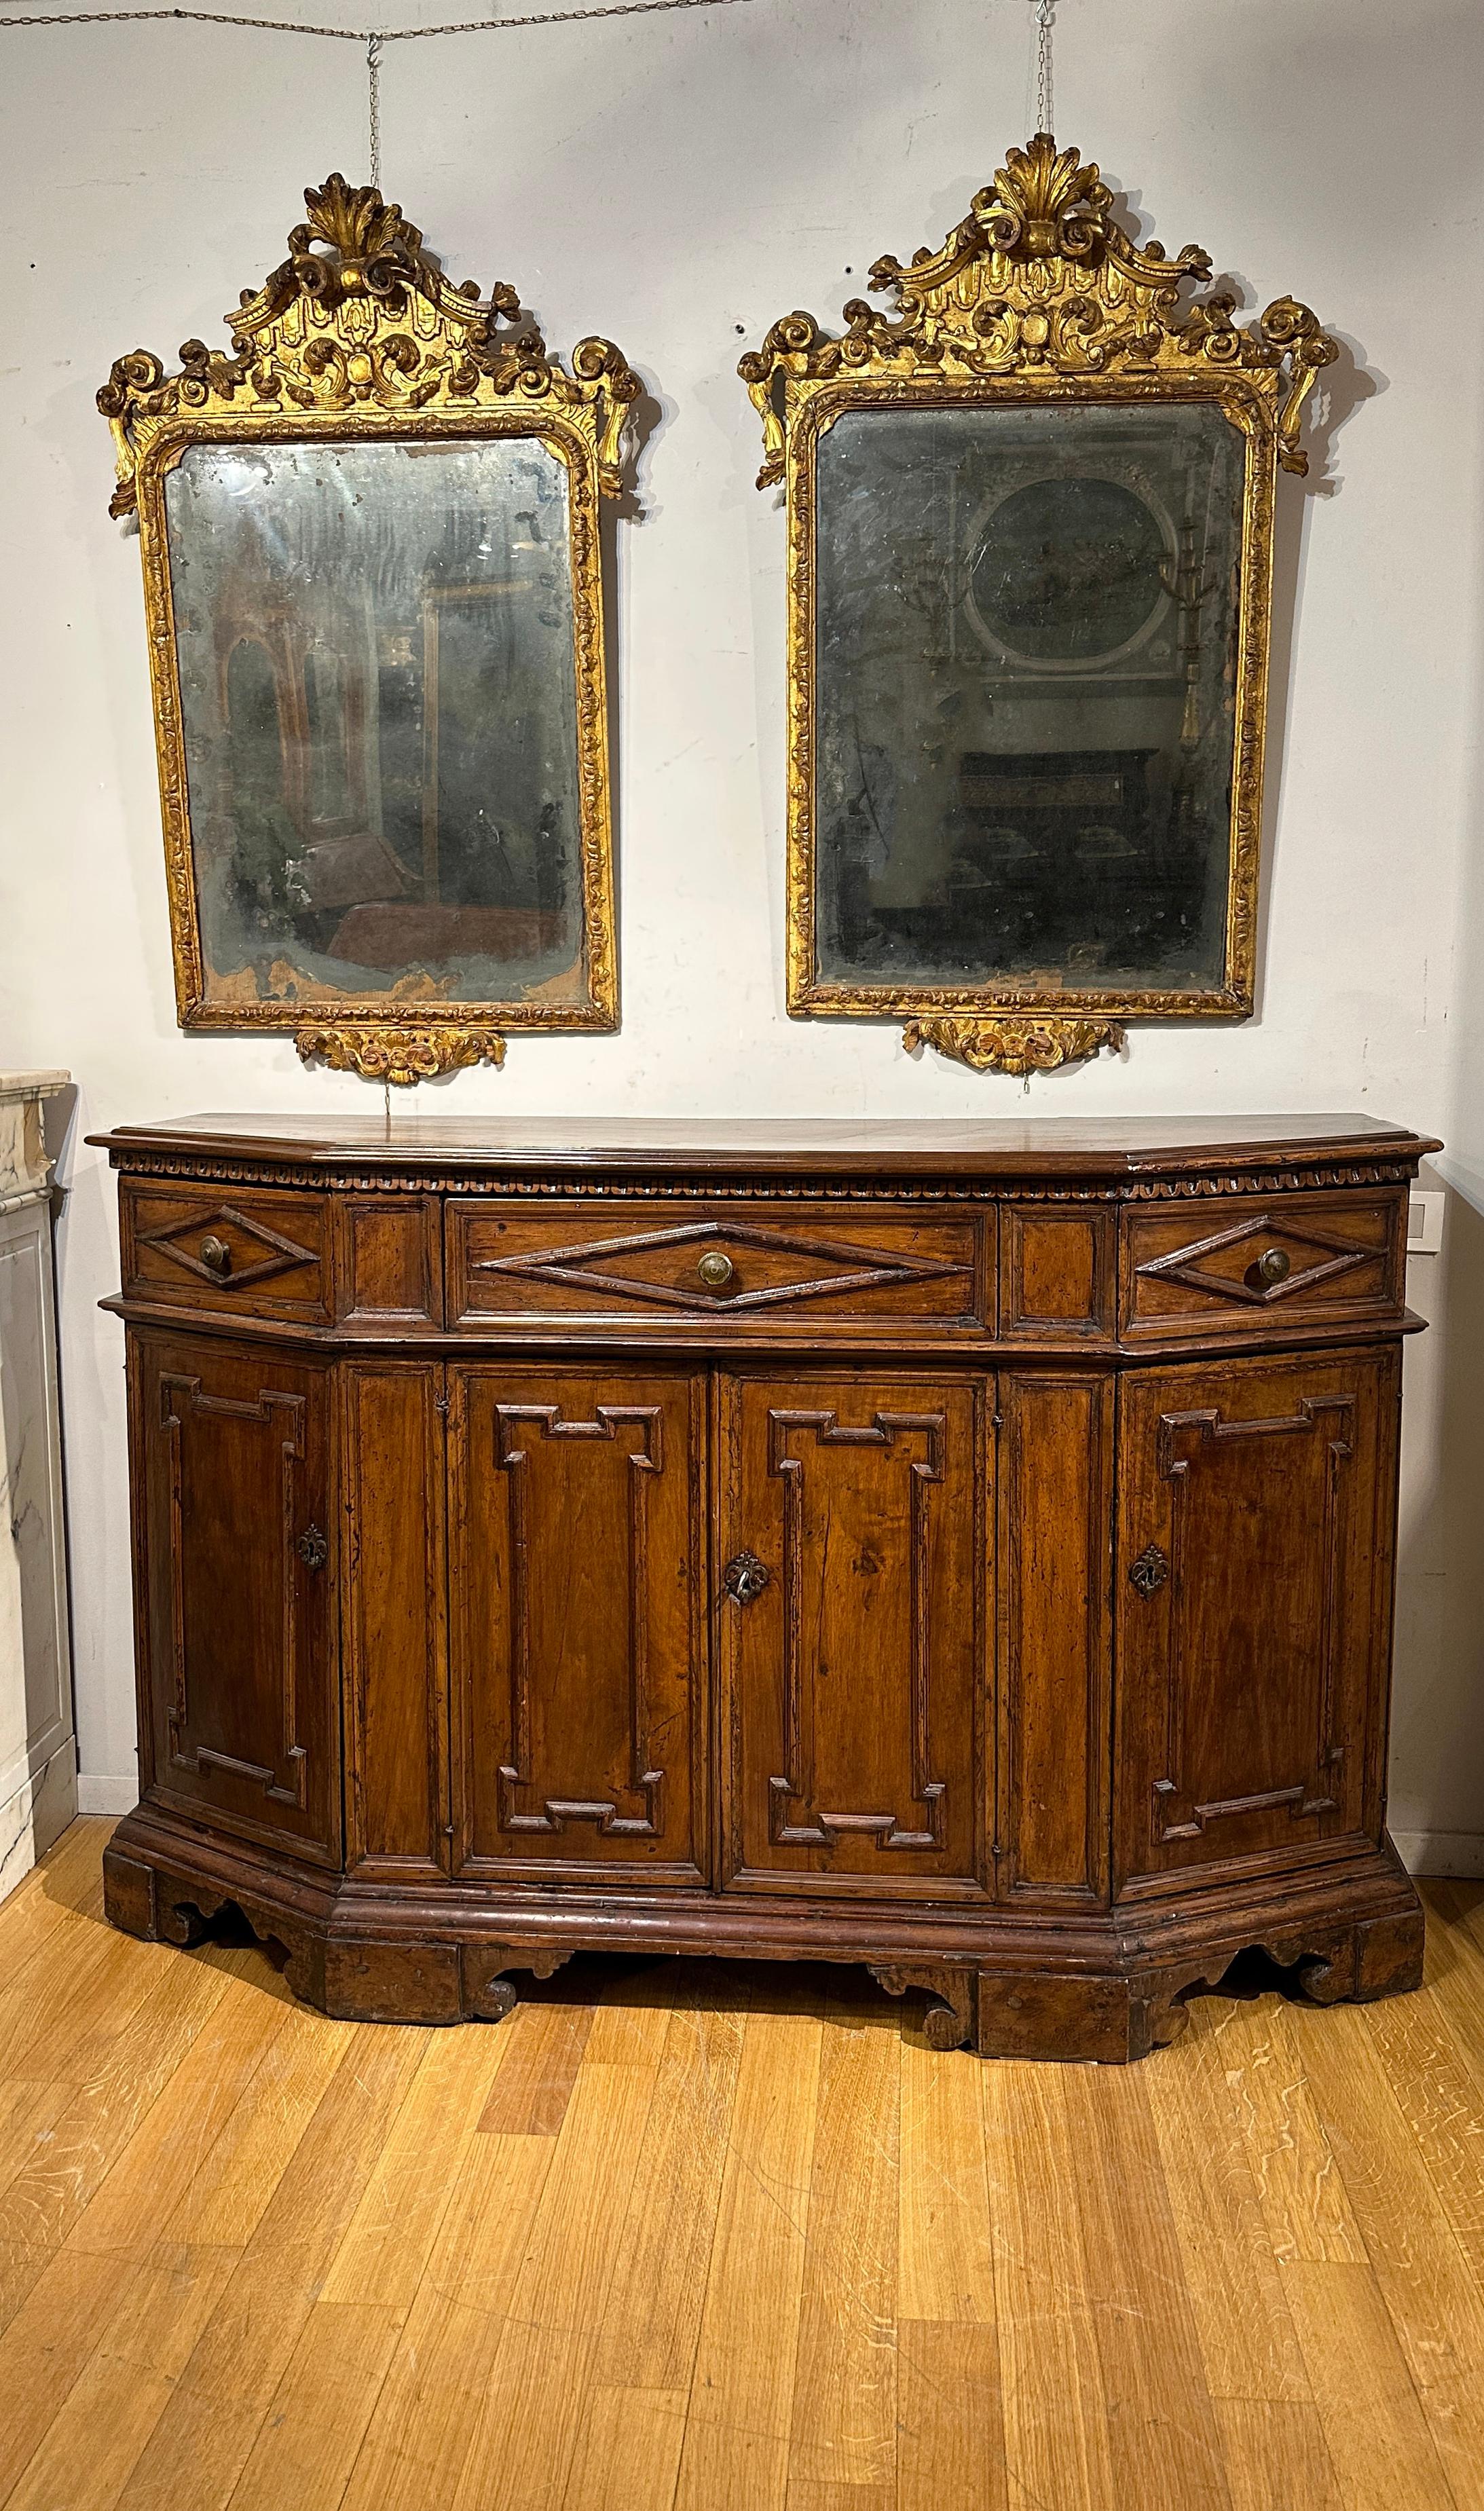 This solid walnut recessed sideboard is an authentic jewel of Tuscan manufacturing from the first half of the 17th century, dating back to the period of the Grand Duchy of Tuscany. The four drawers and the four doors, enriched by geometric frames